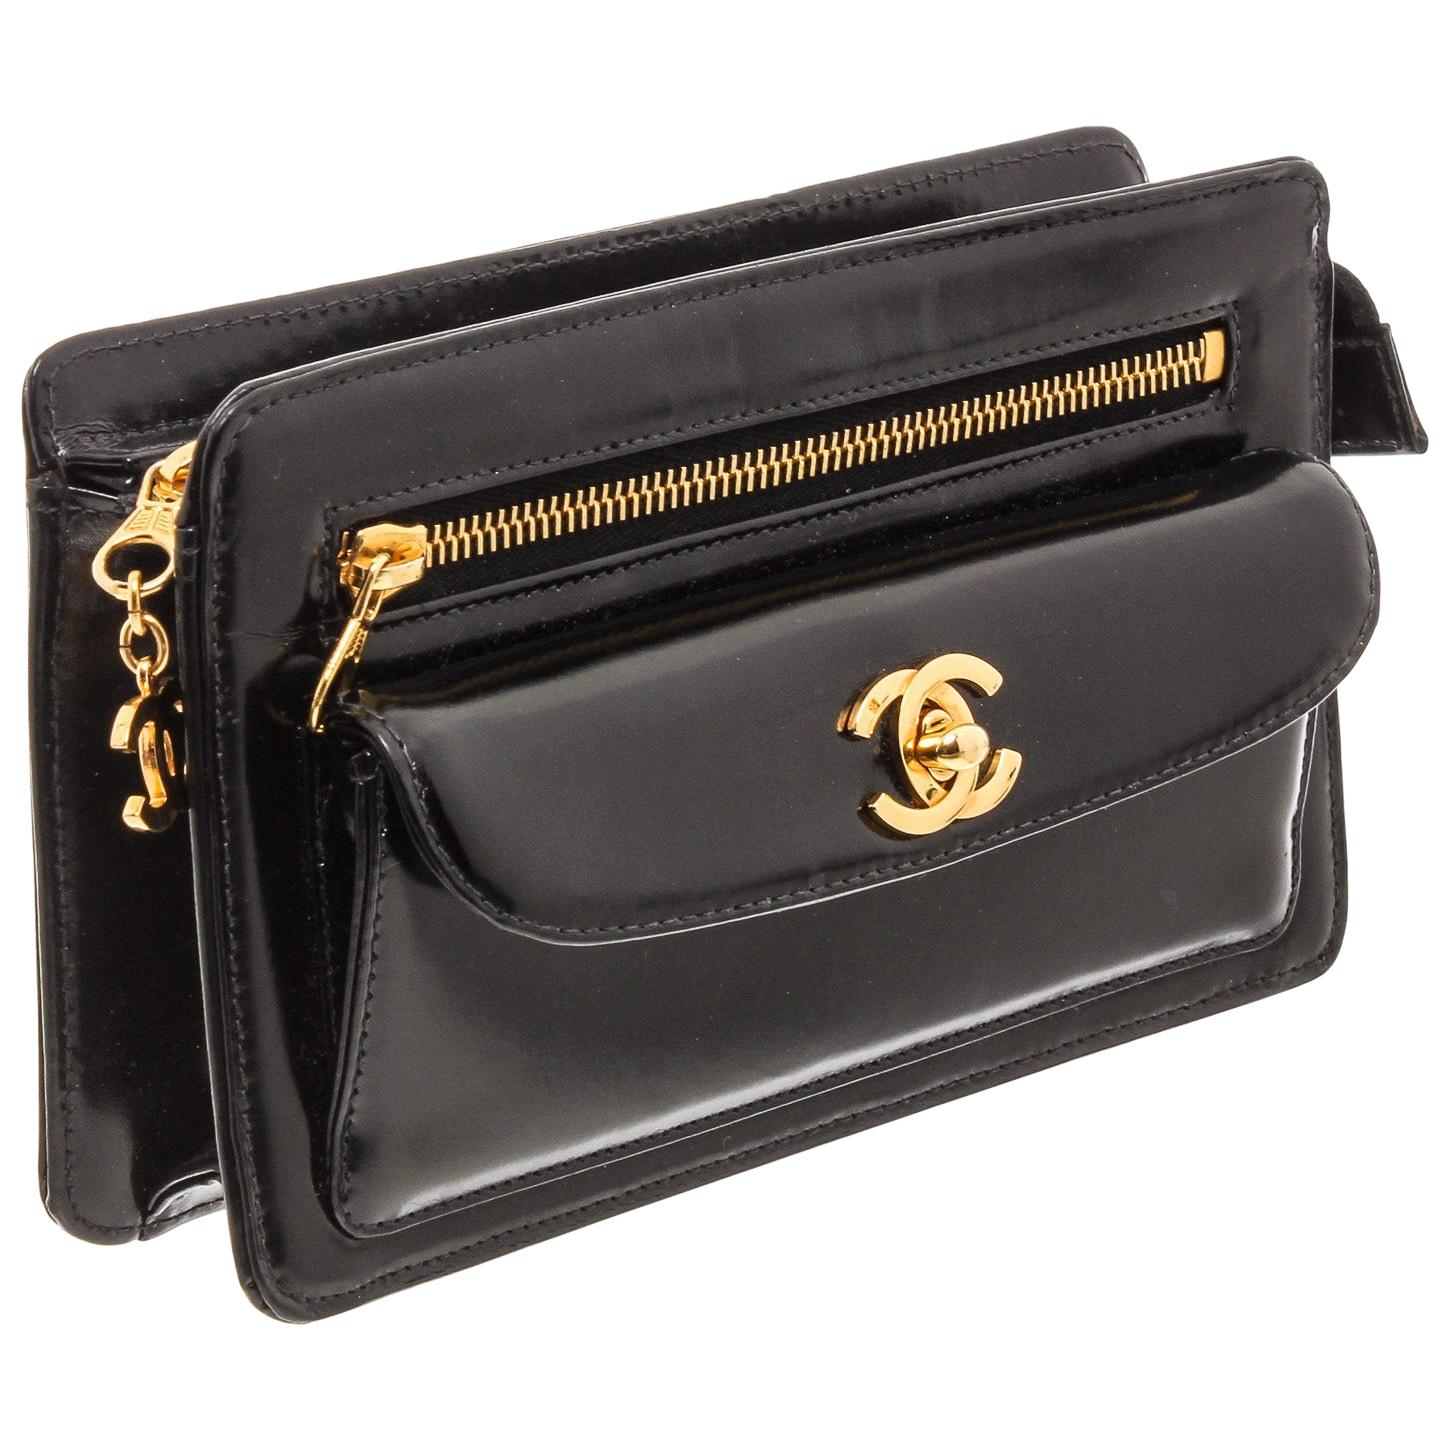 Patent Leather Clutch Vintage Bags, Handbags & Cases for sale